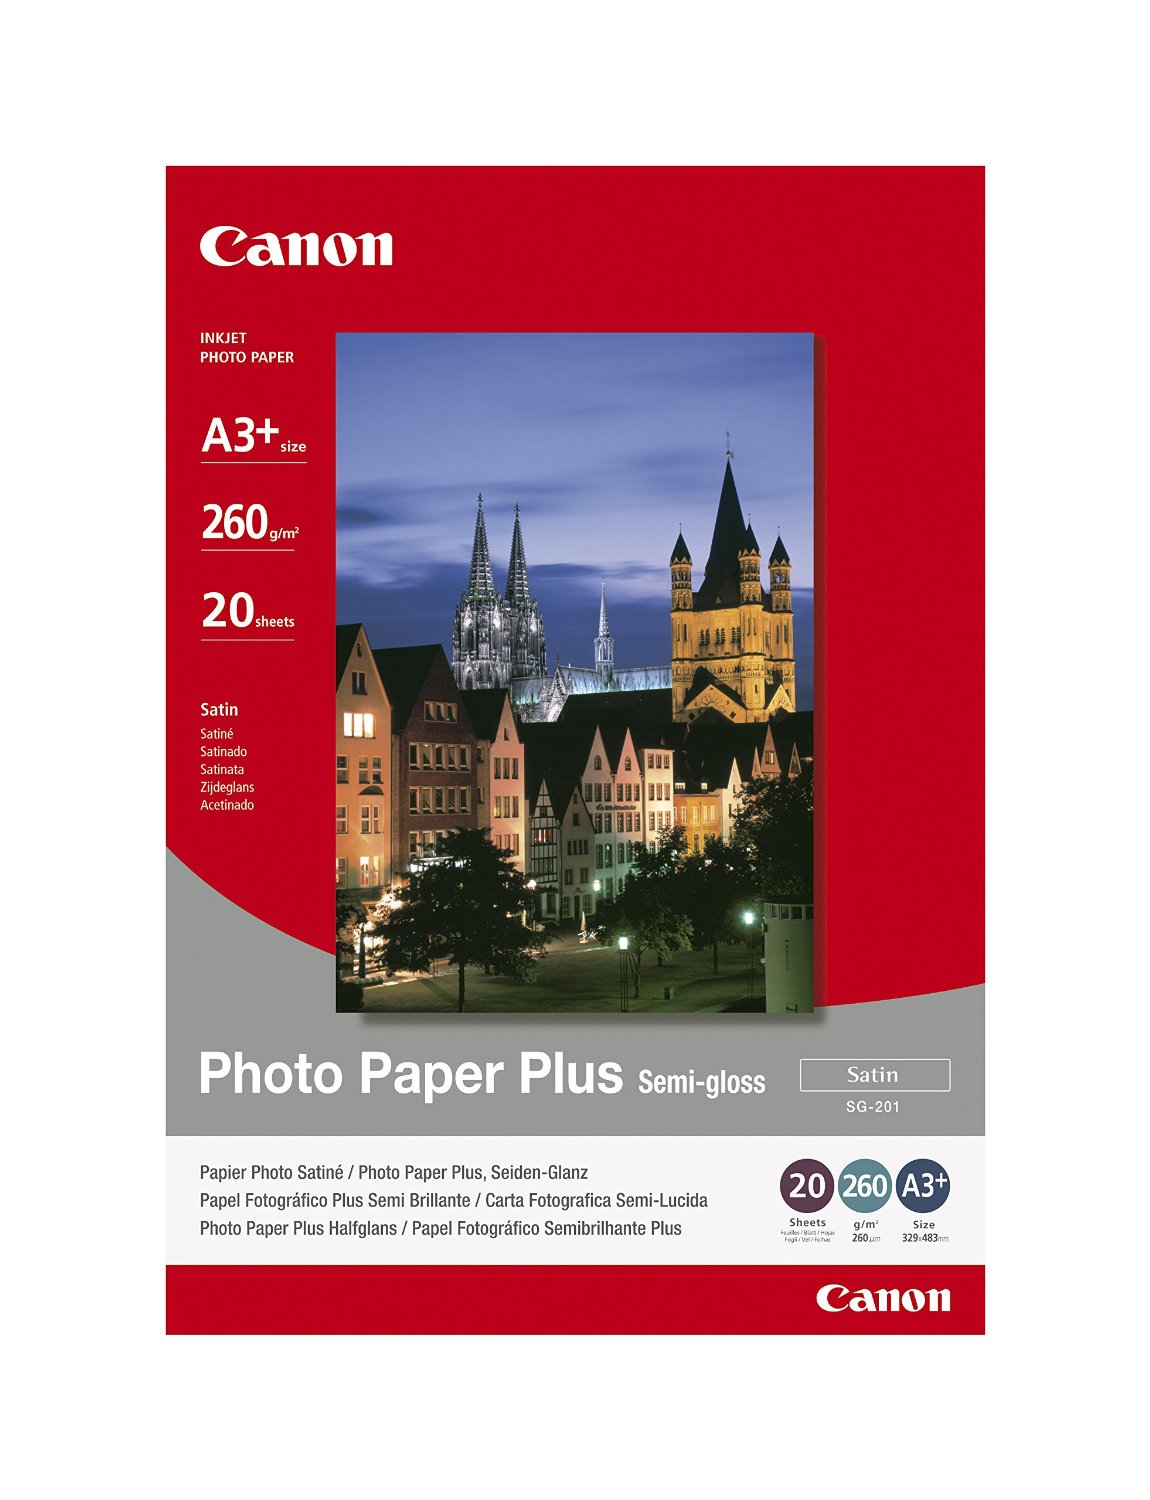 Paper Canon SG201 Photo Paper Plus Semi-glossy | 260g | A3+ | 20sheets foto papīrs